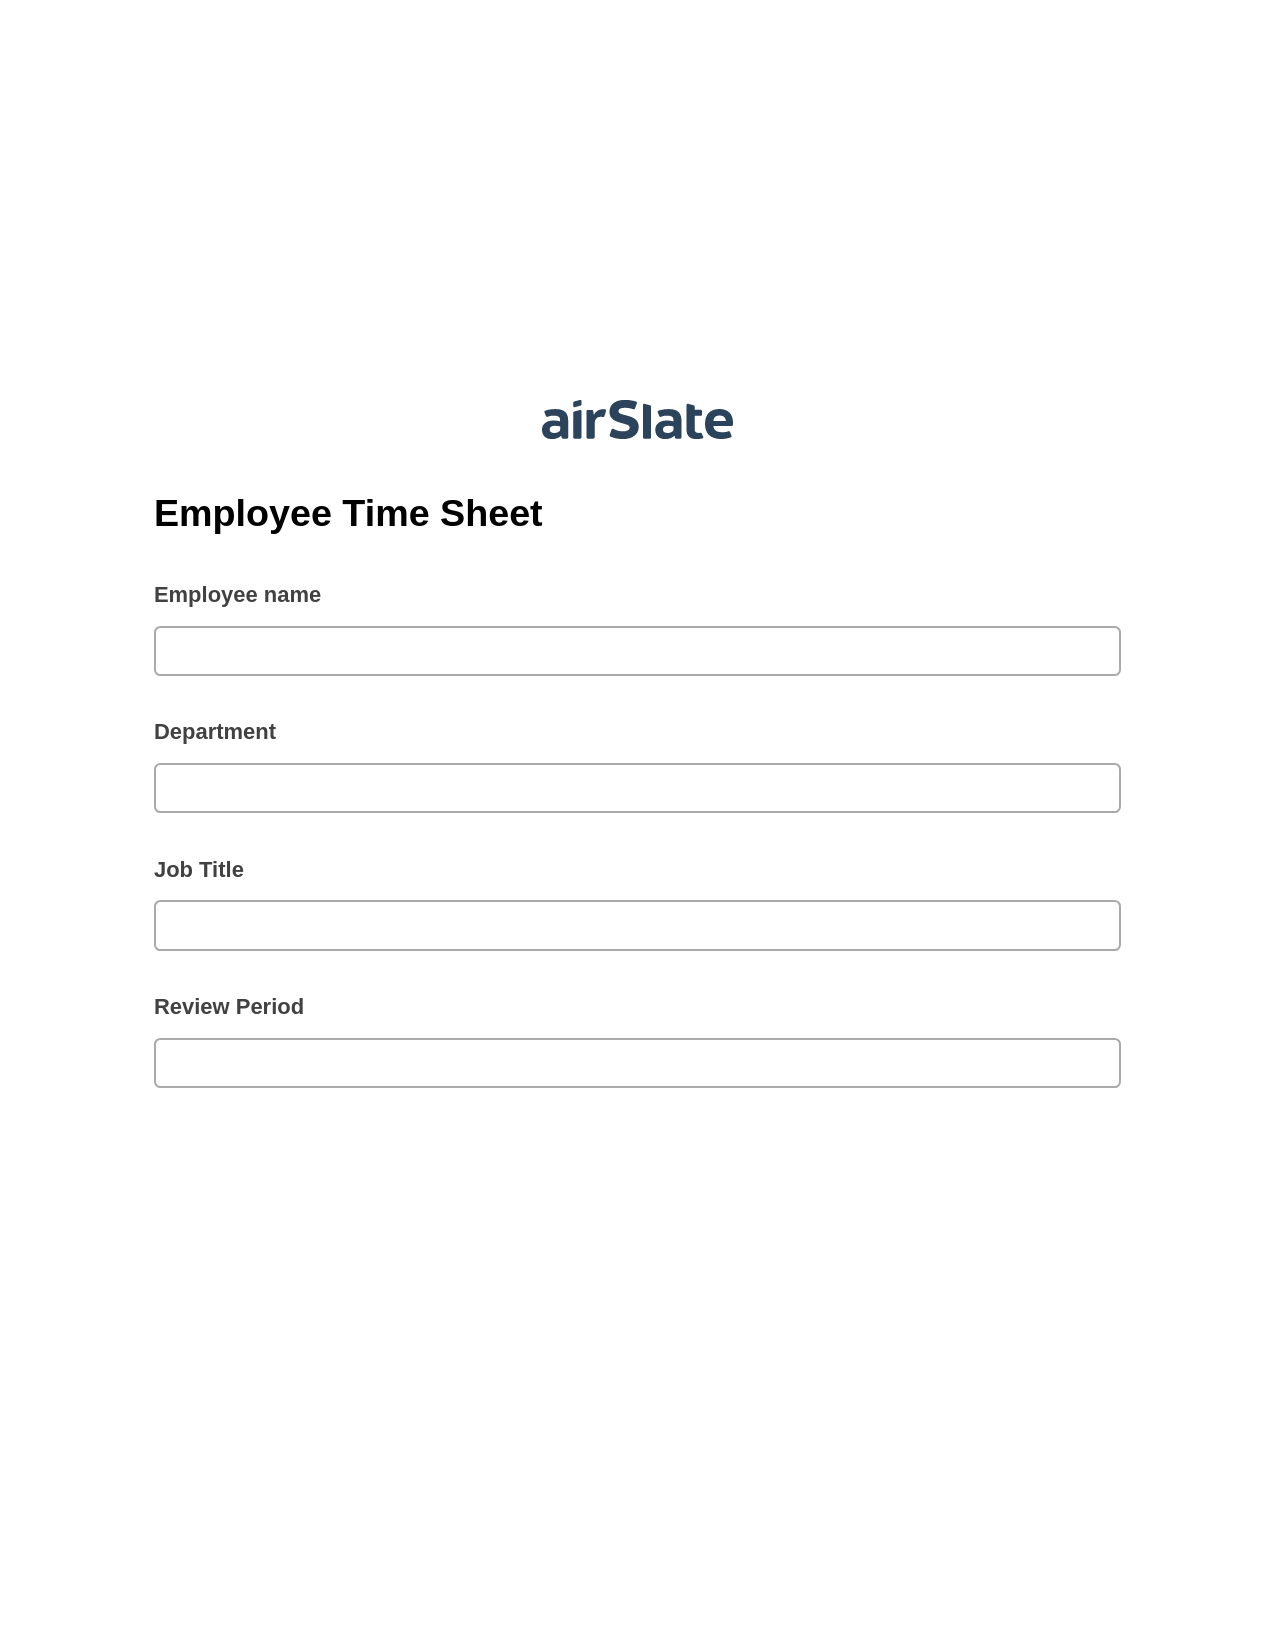 Multirole Employee Time Sheet Pre-fill Dropdowns from Airtable, Update Audit Trail Bot, Export to Google Sheet Bot